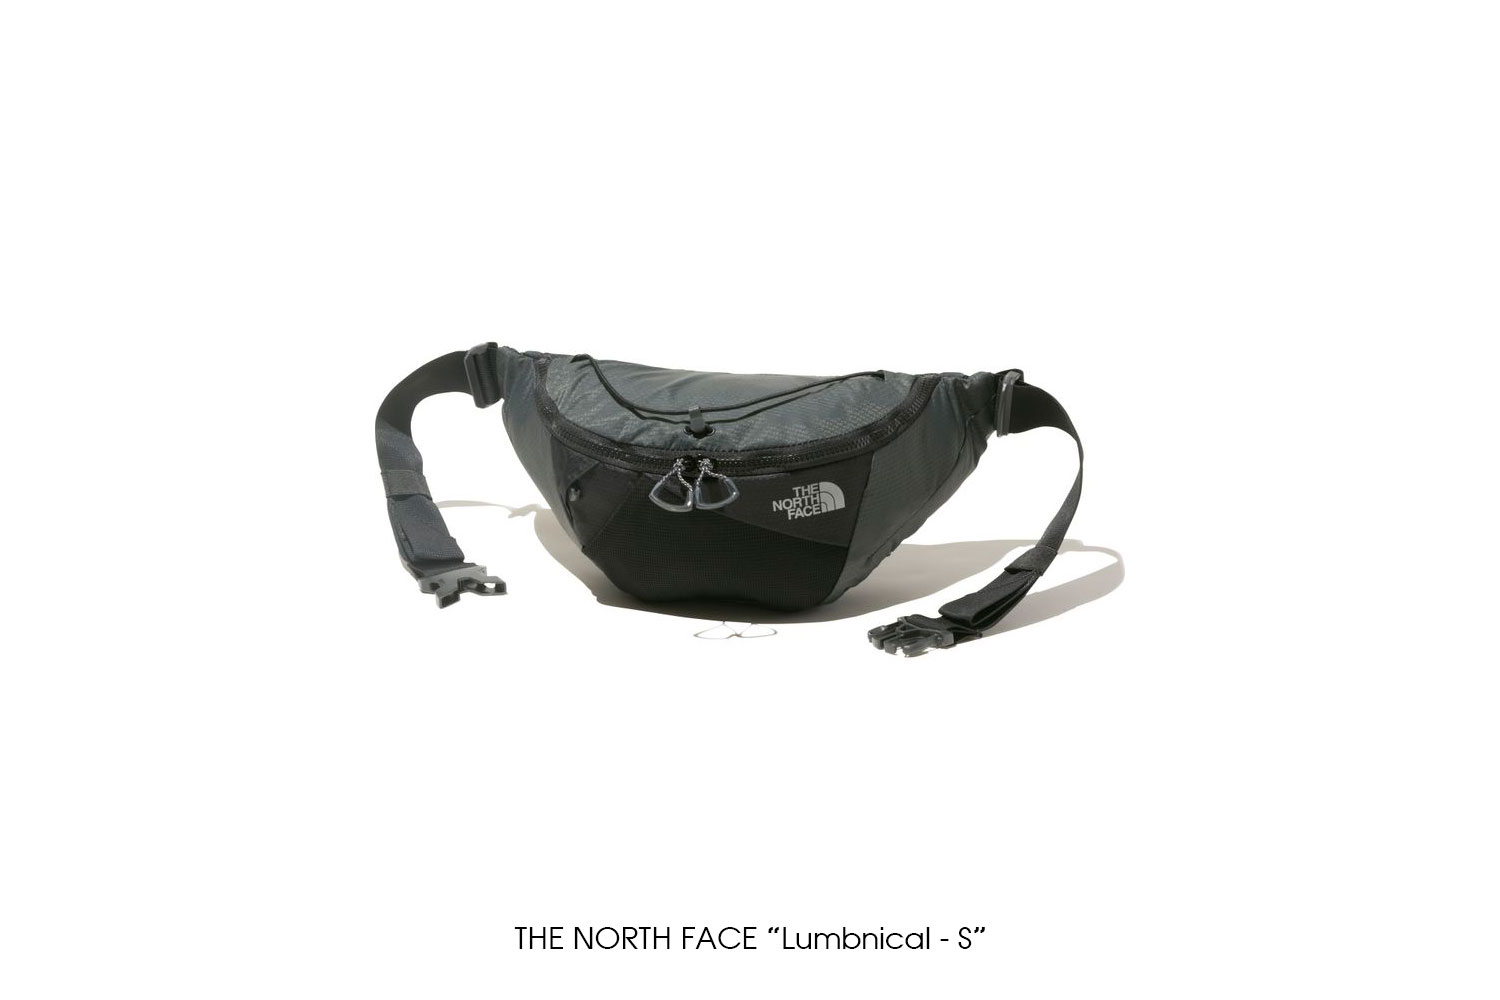 THE NORTH FACE "Lumbnical - S"